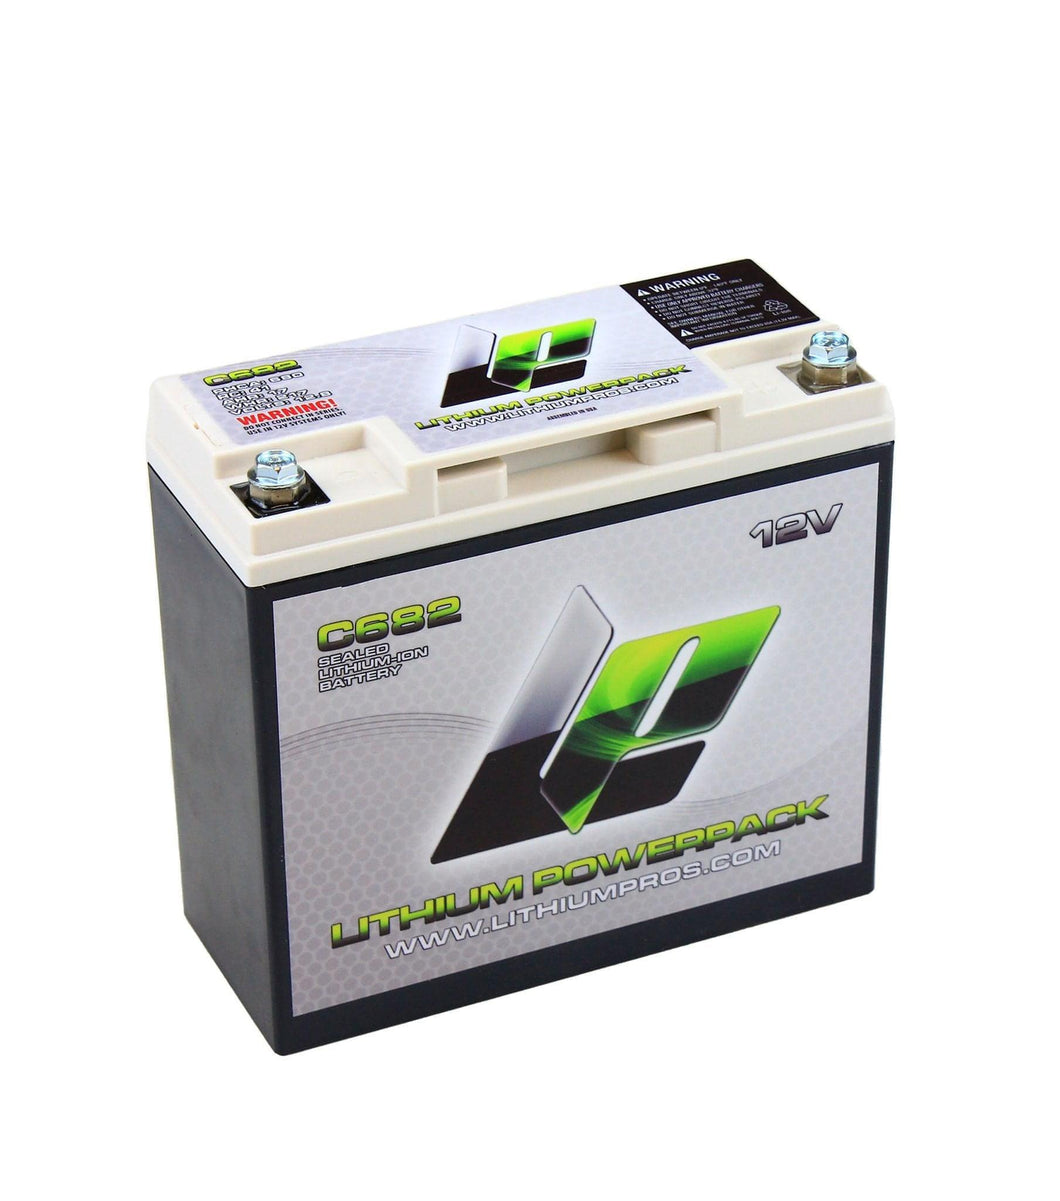 C682 12V 16Ah Lithium Ion Racing Battery - Lithium Pros